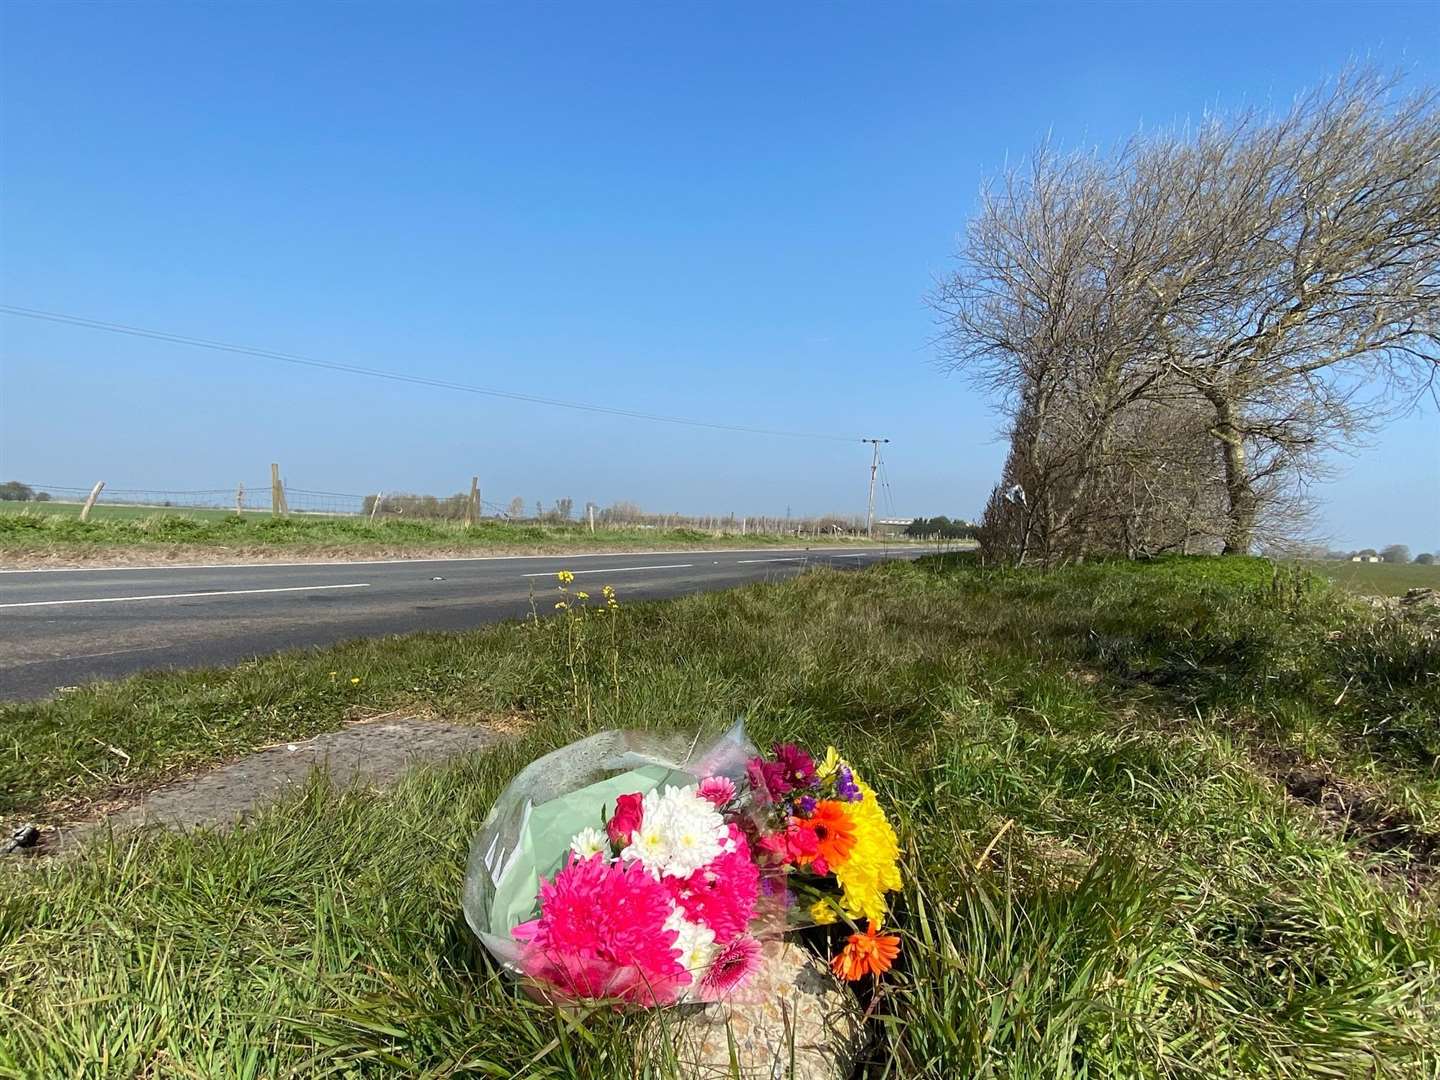 Bouquets of flowers have been left at the scene of the crash. Photo: Barry Goodwin